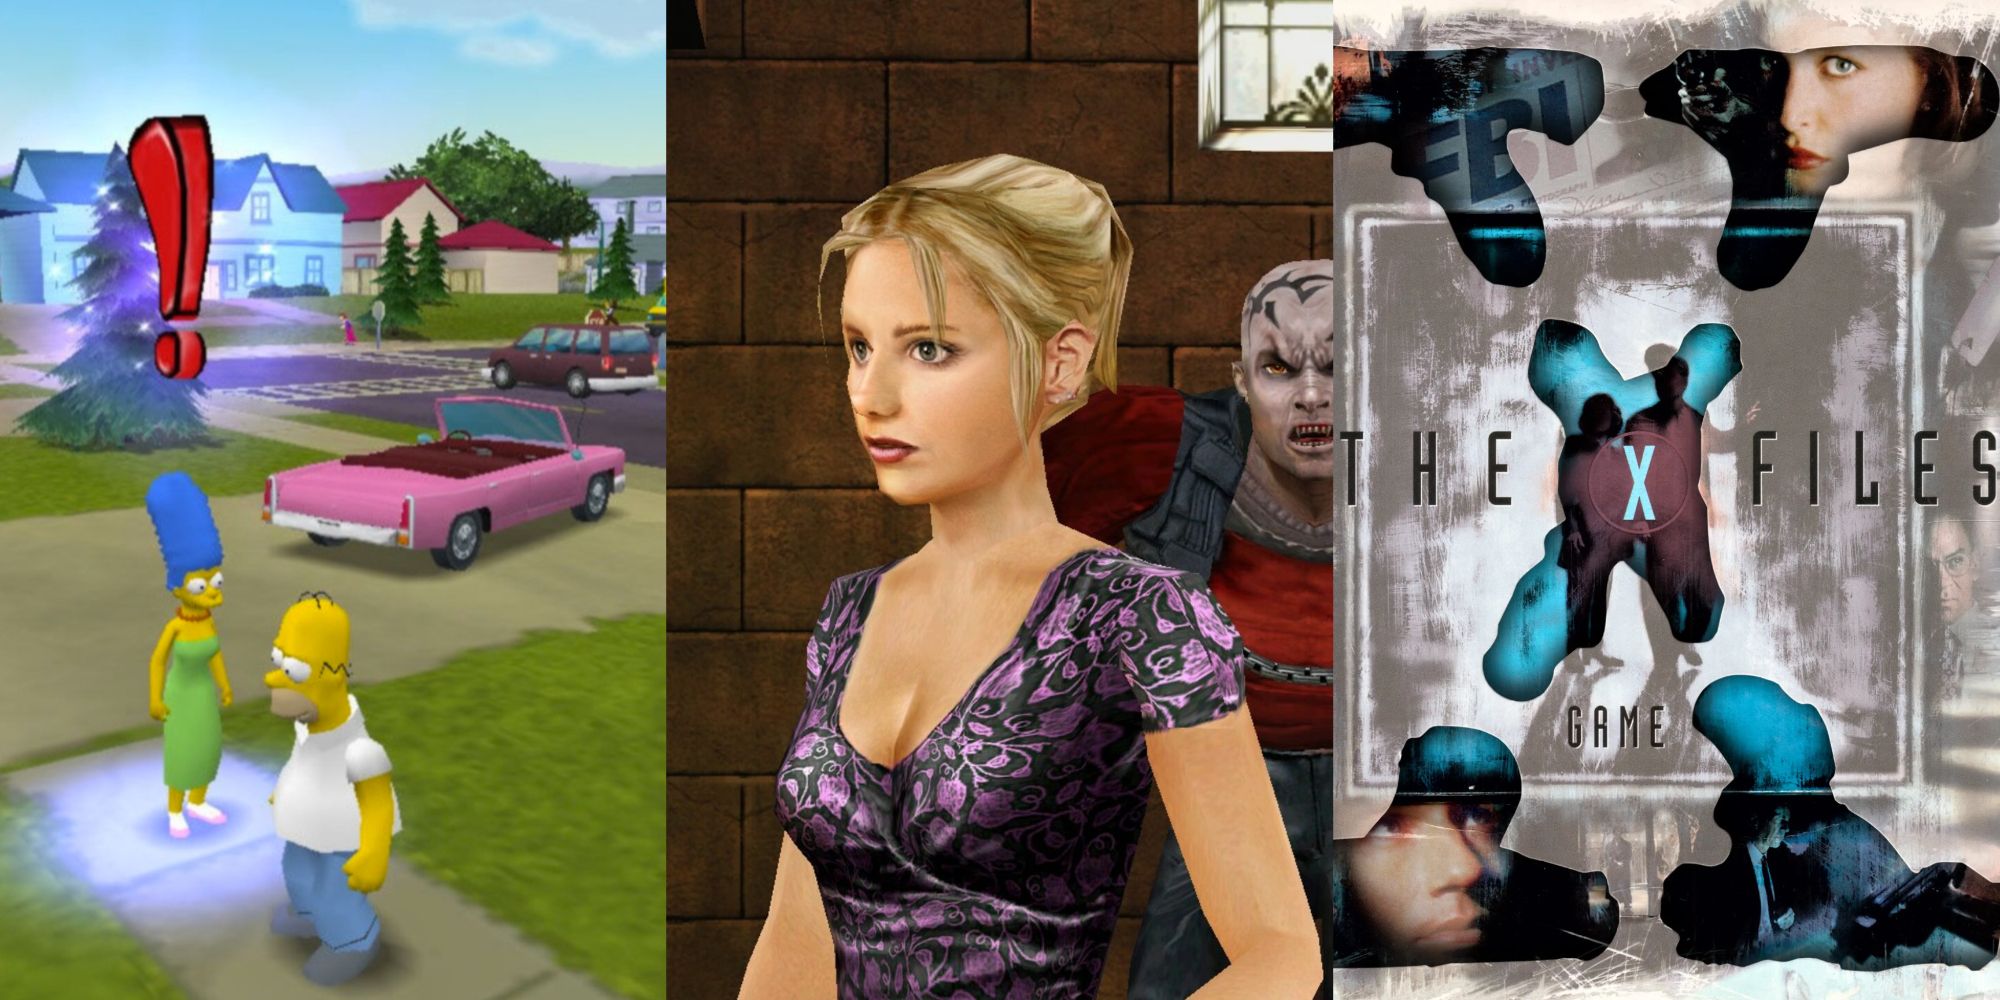 Collage if The Simpsons: Hit & Run, Buffy The Vampire Slayer game, and The X-Files game